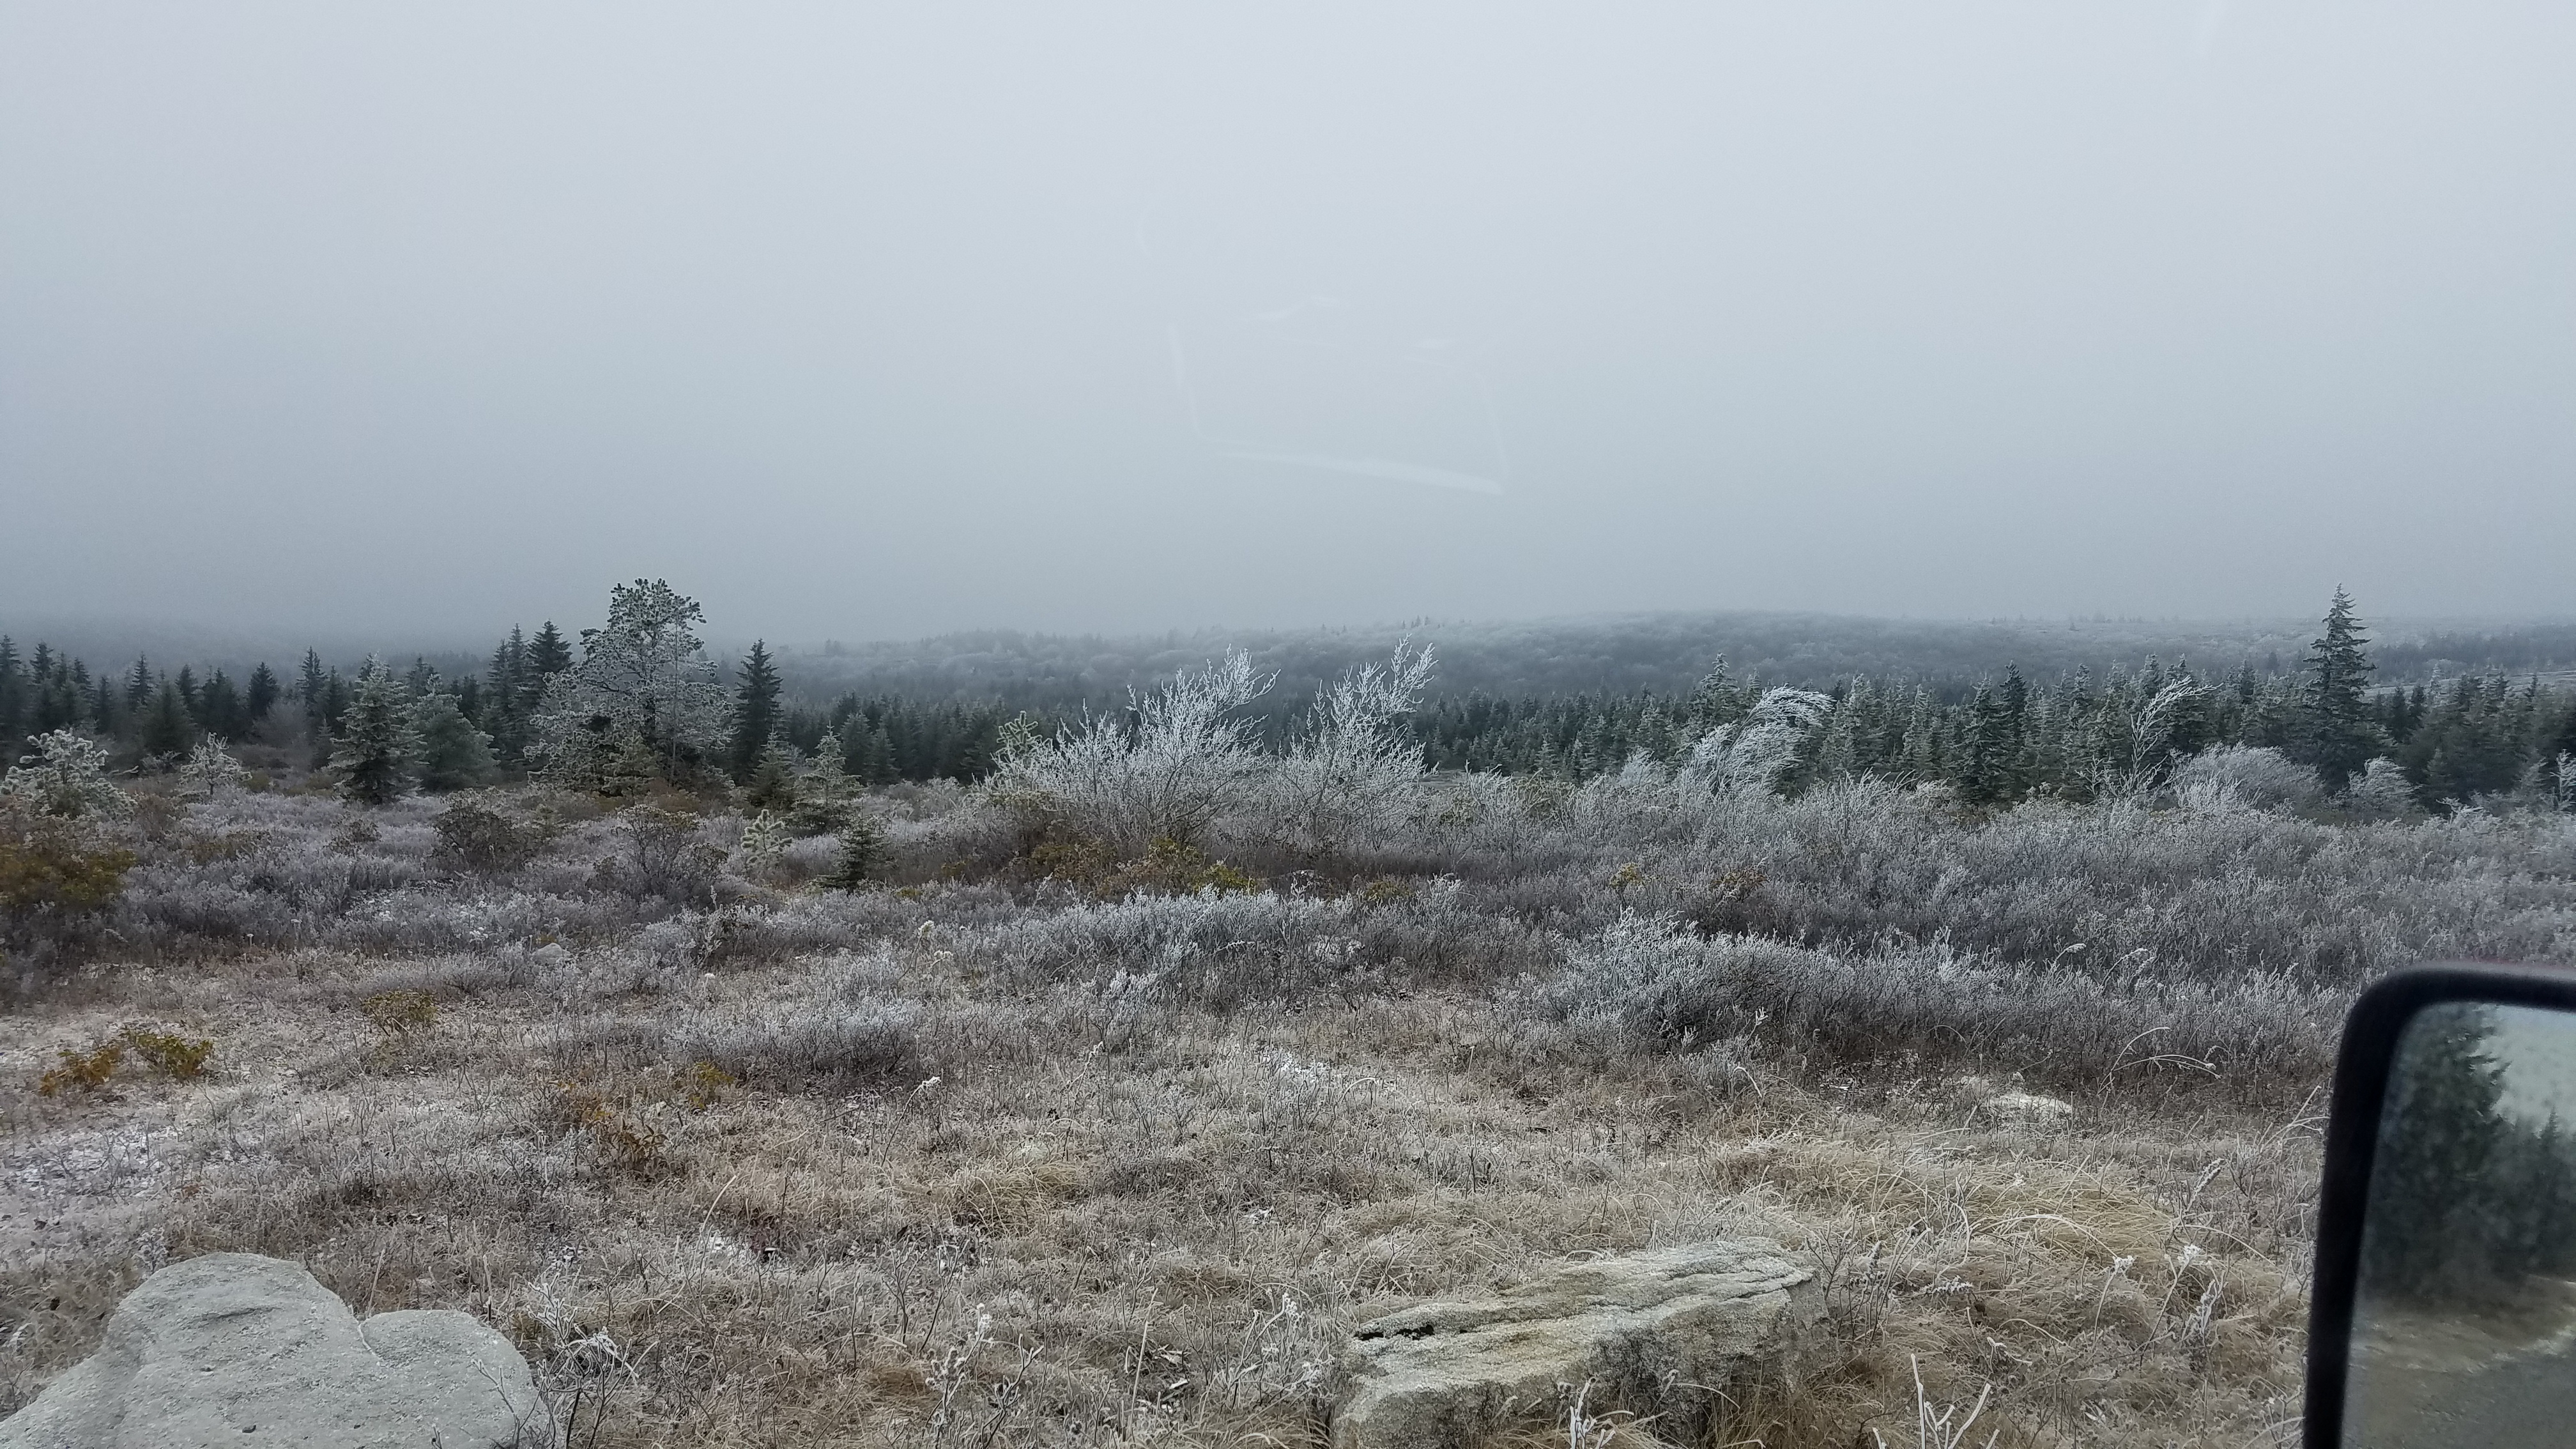 Dolly Sods, where I had hoped to be.